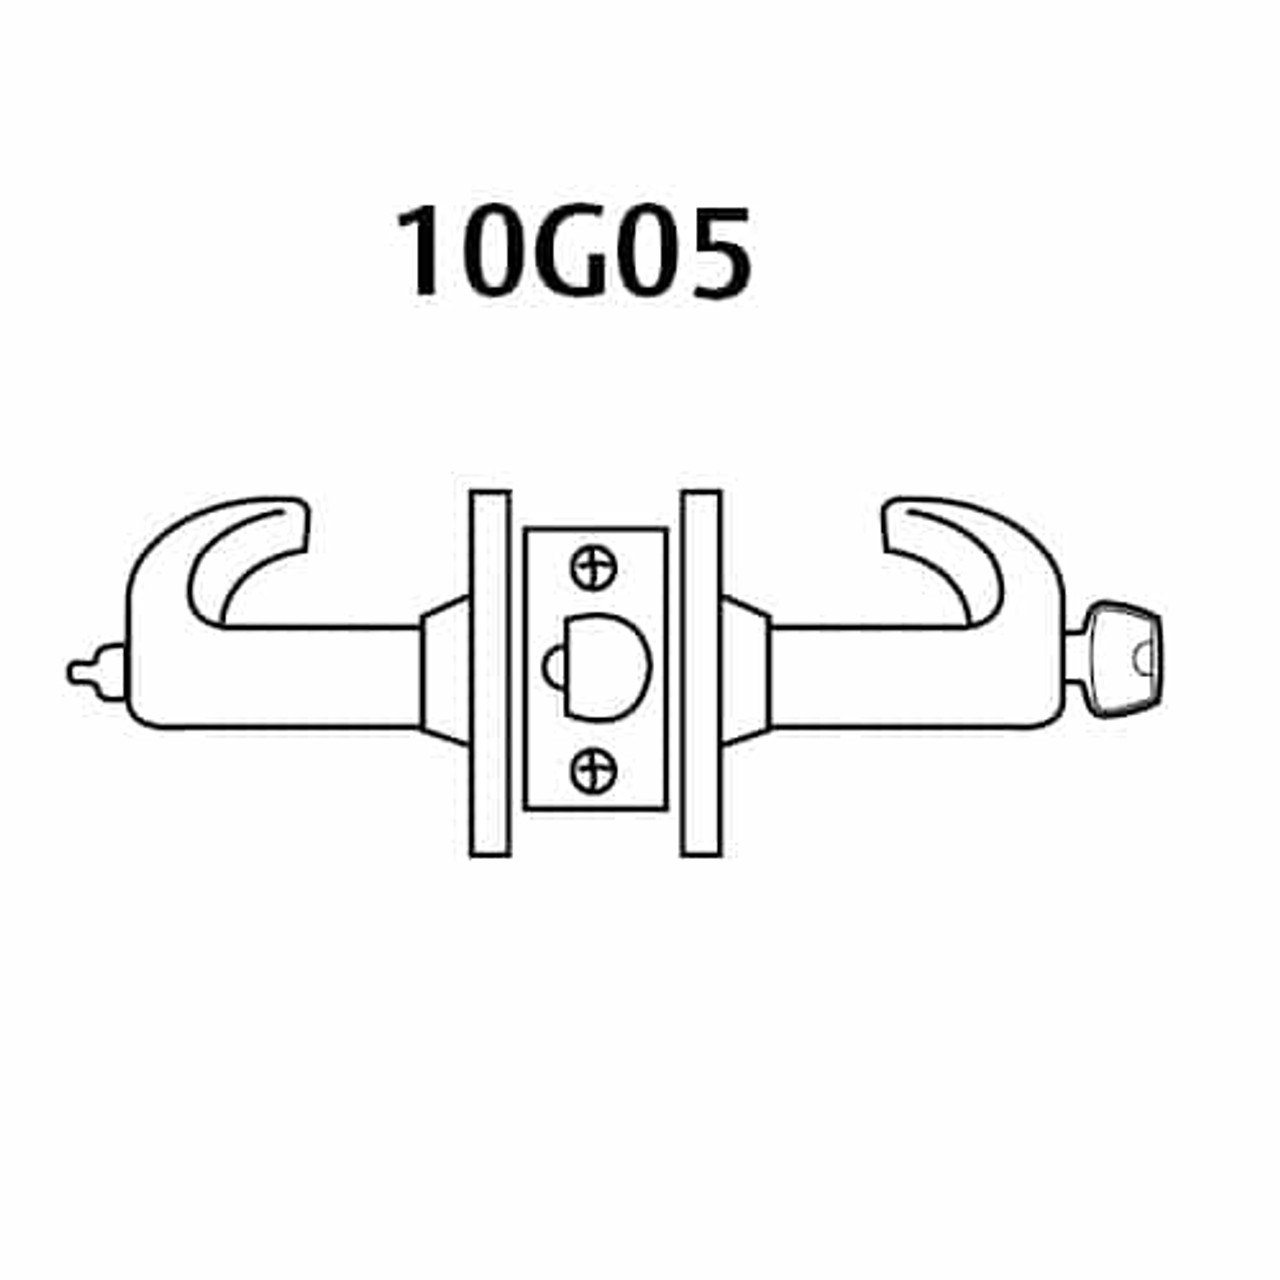 2860-10G05-LJ-10 Sargent 10 Line Cylindrical Entry/Office Locks with J Lever Design and L Rose Prepped for LFIC in Dull Bronze